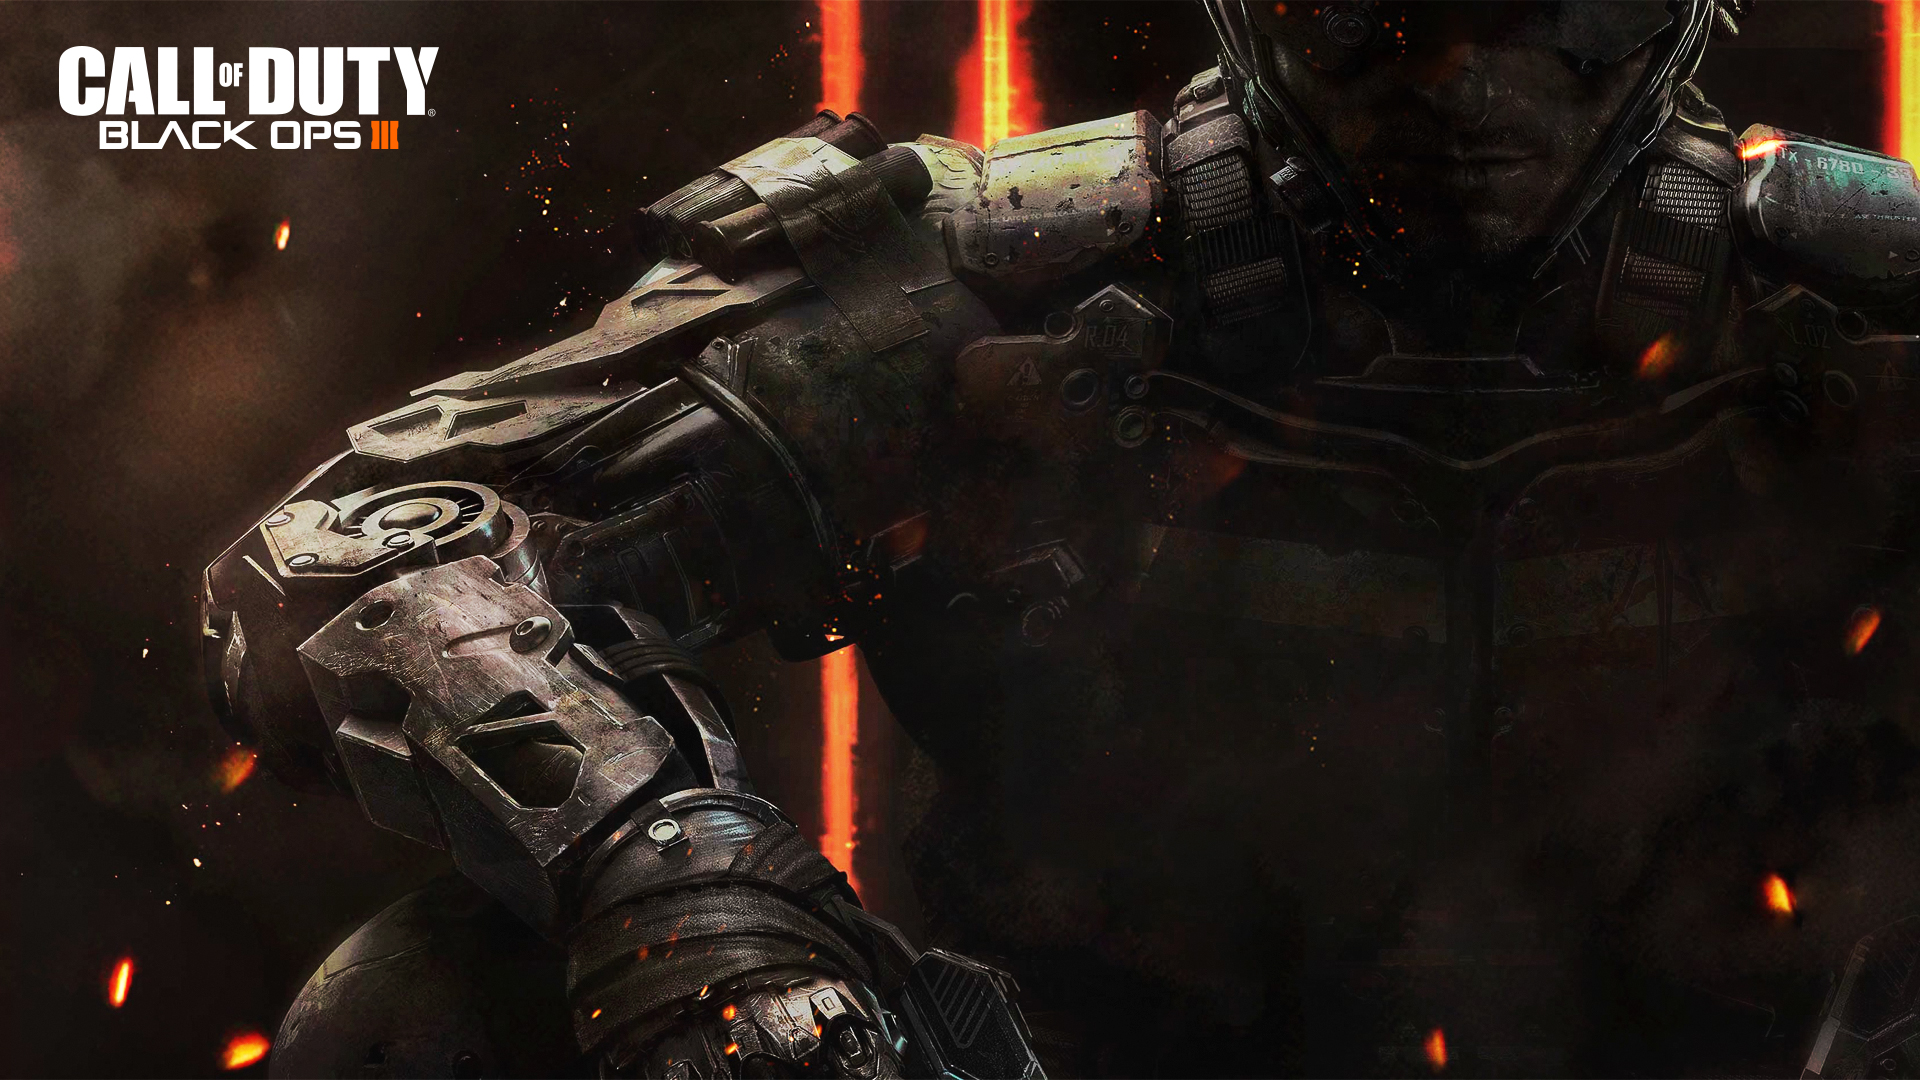 Free Download Black Ops 3 Wallpapers Bo3 Download Unofficial Call Of Duty 19x1080 For Your Desktop Mobile Tablet Explore 50 Black Ops 3 Pc Wallpaper Black Ops 3 Wallpaper